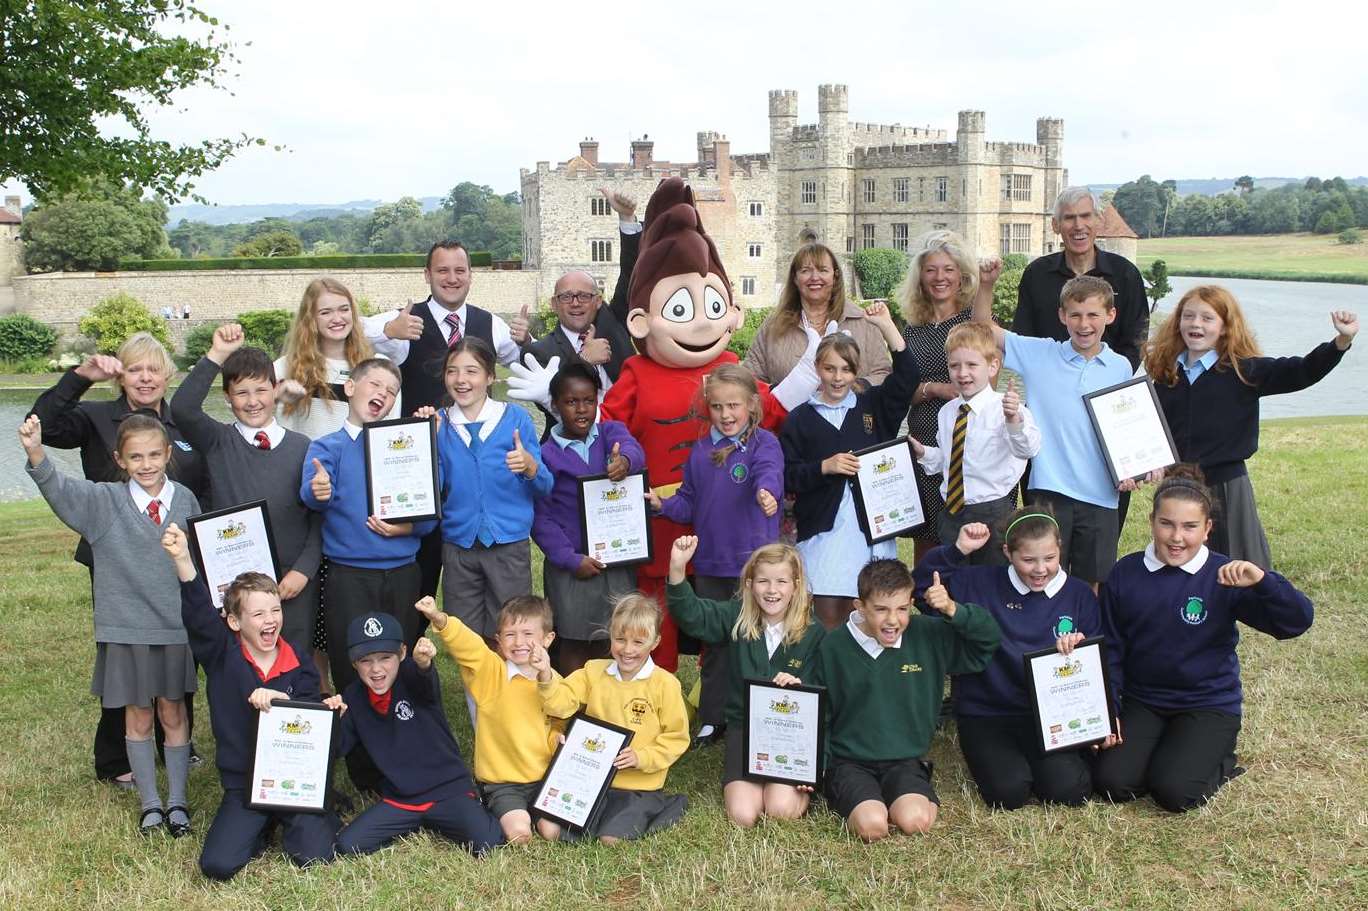 All winners of the KM "Walk to School Challenge" with their certificates at Leeds castle with Sponsors from left, Margaret Brook (IMP), Hannah Lawrence (Leeds Castle), David Cavender and Matt Trusty (Spec Savers), Elizabeth Carr (Bel UK), Libby Lawson (KM) and Nicholas Brook (IMP) plus Walk to School character Wowzer